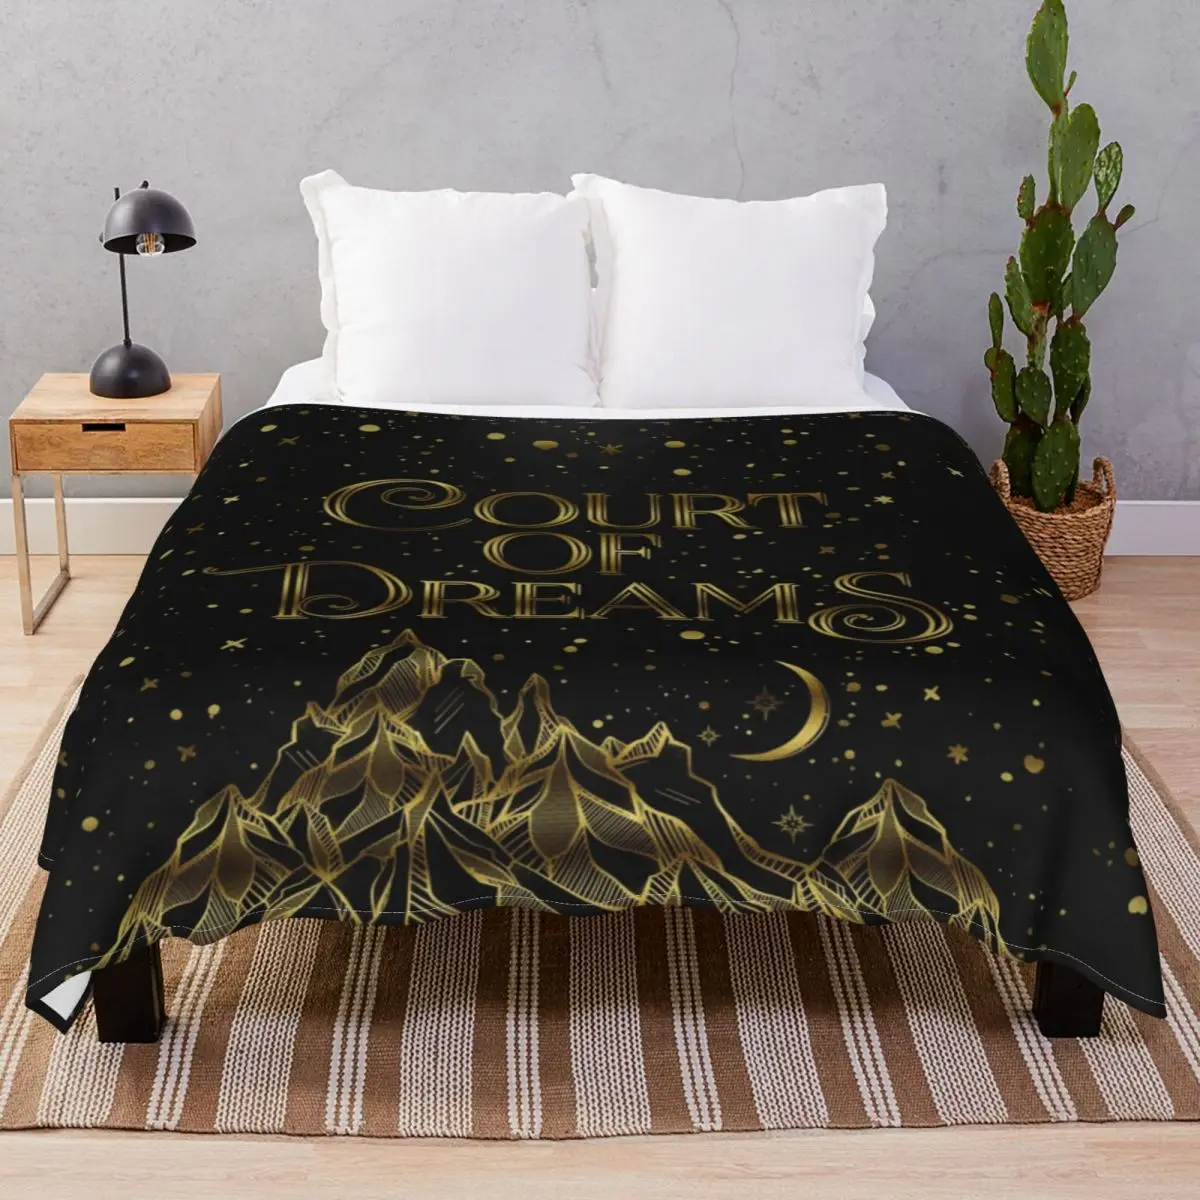 Court Of Dreams ACOMAF Blankets Fleece Plush Decoration Warm Unisex Throw Blanket for Bedding Home Couch Travel Cinema